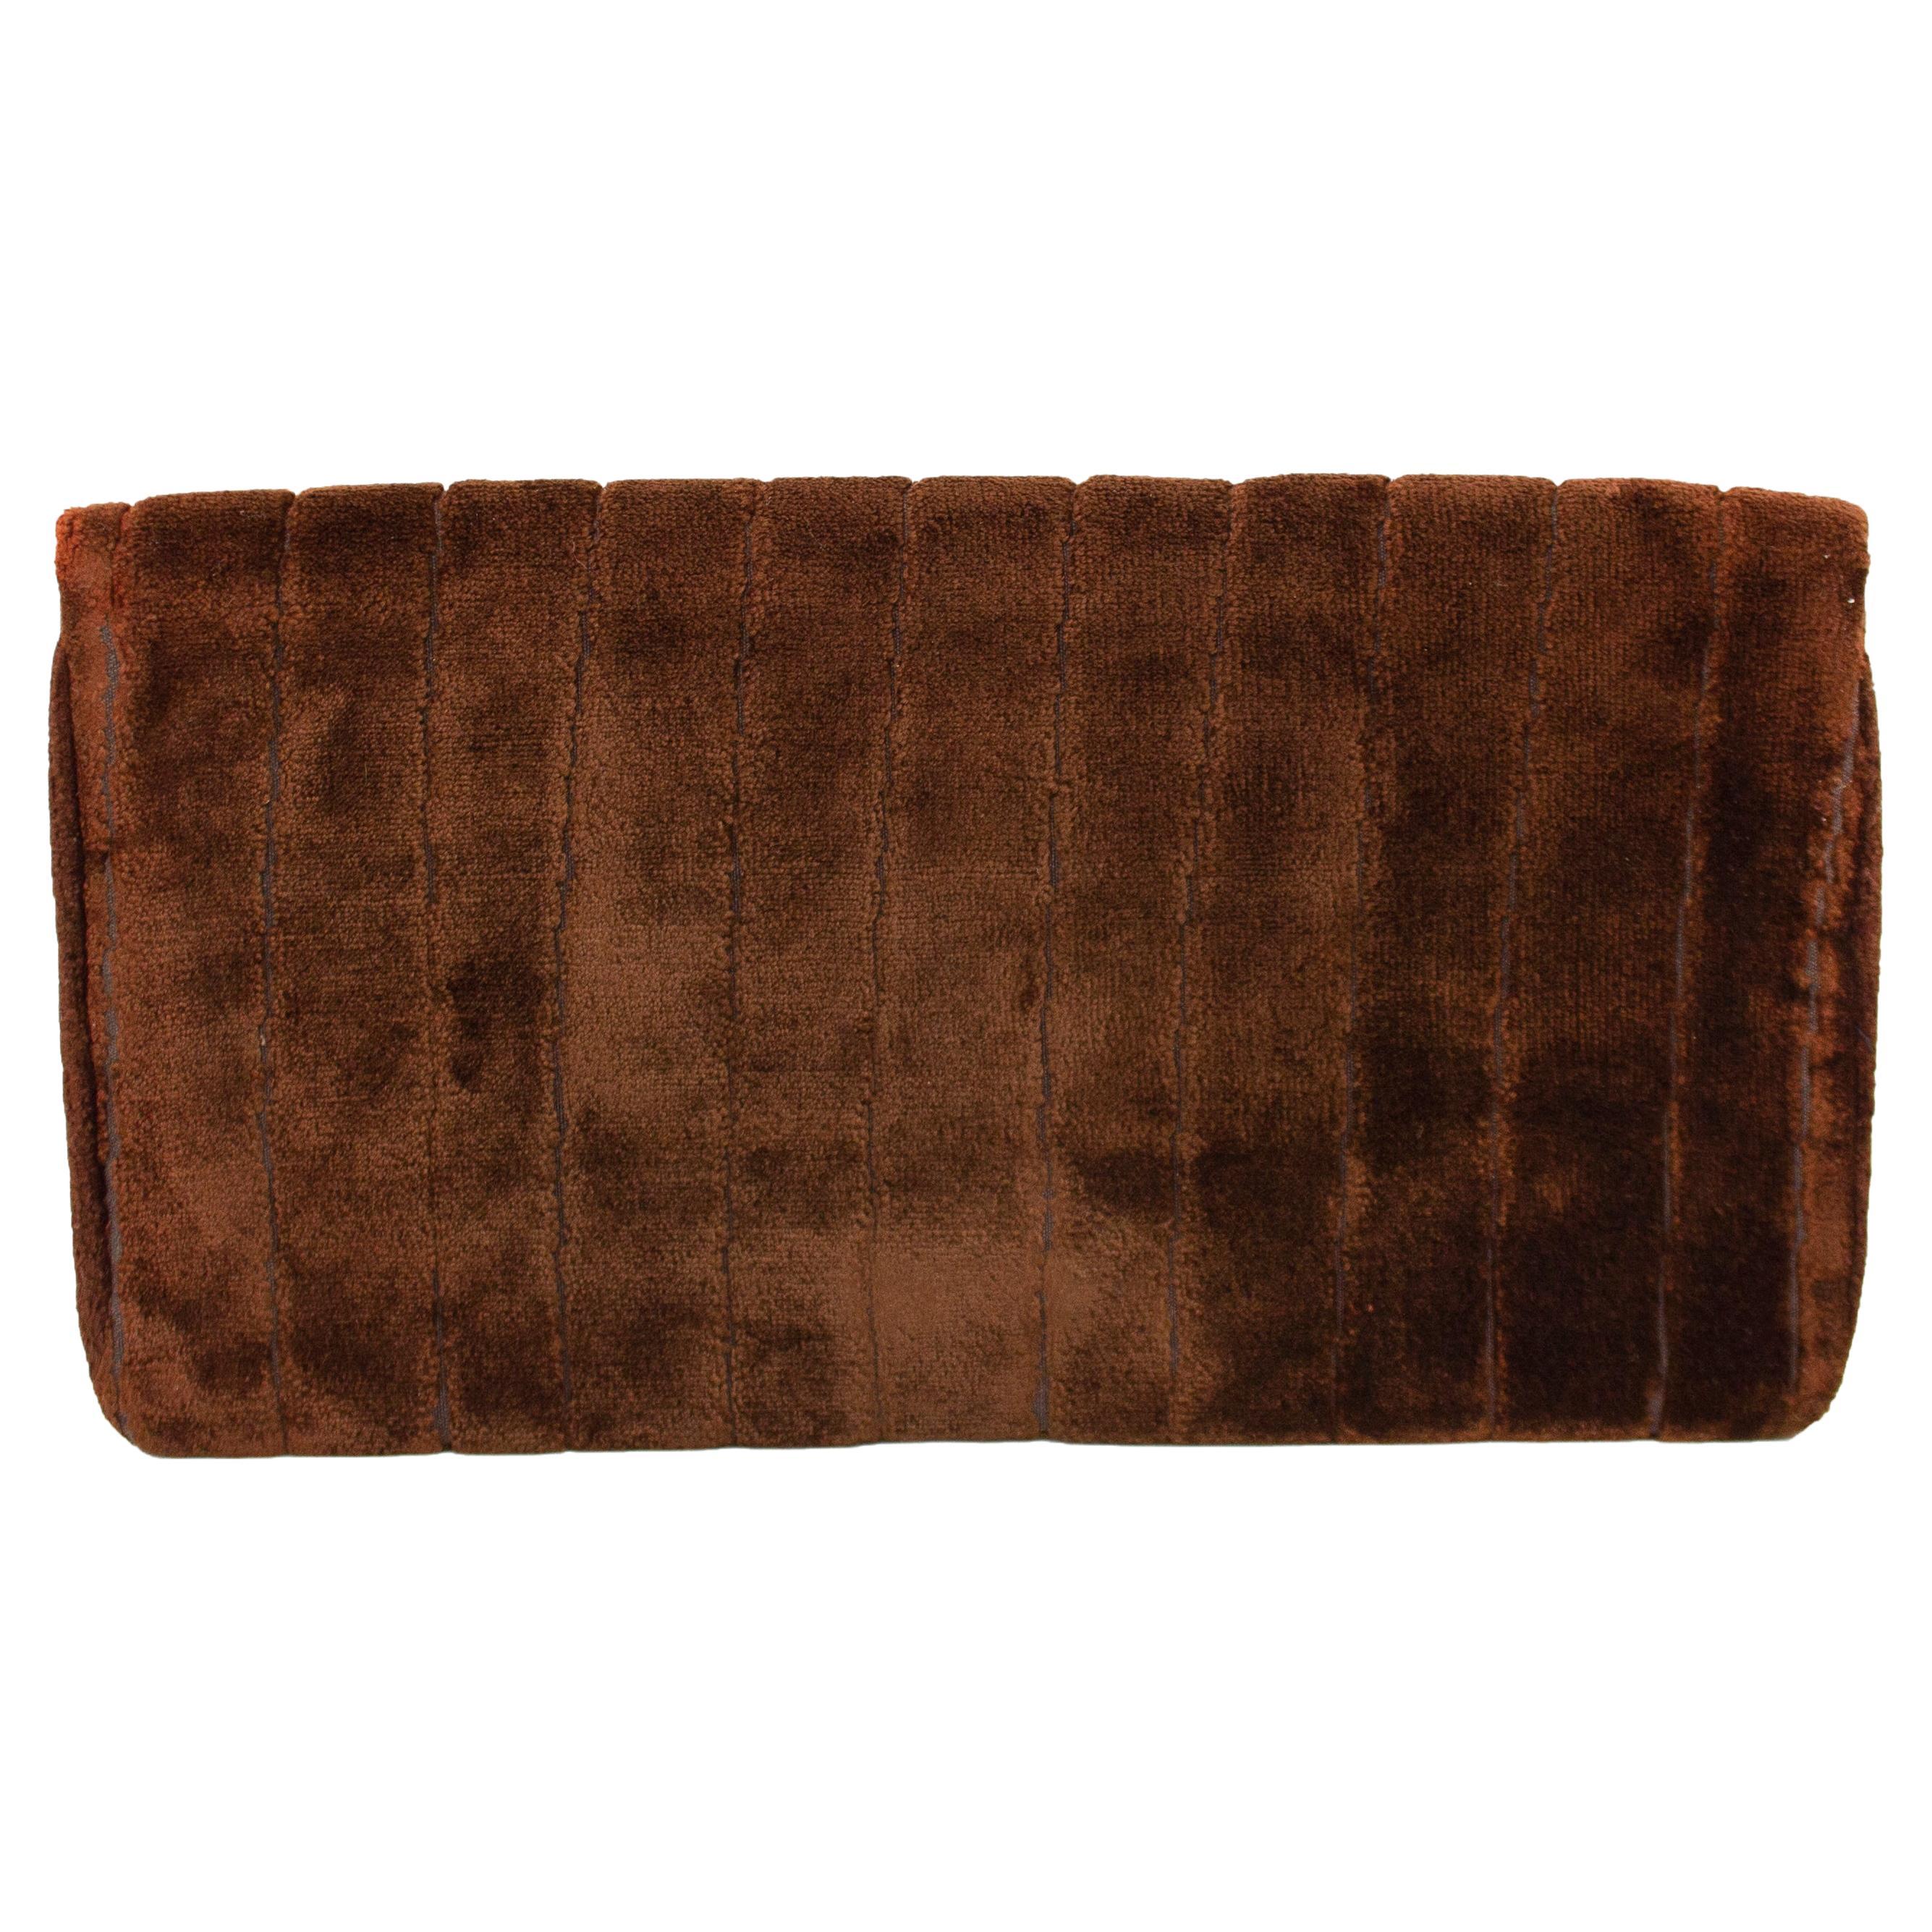 Roberta Di Camerino clutch dating from the 1970s. Chocolate brown patterned velvet with with small gold 'R' logo at top left corner. Snap button closure. Brown leather interior. Good  vintage condition - some interior wear. Made in Italy. 11